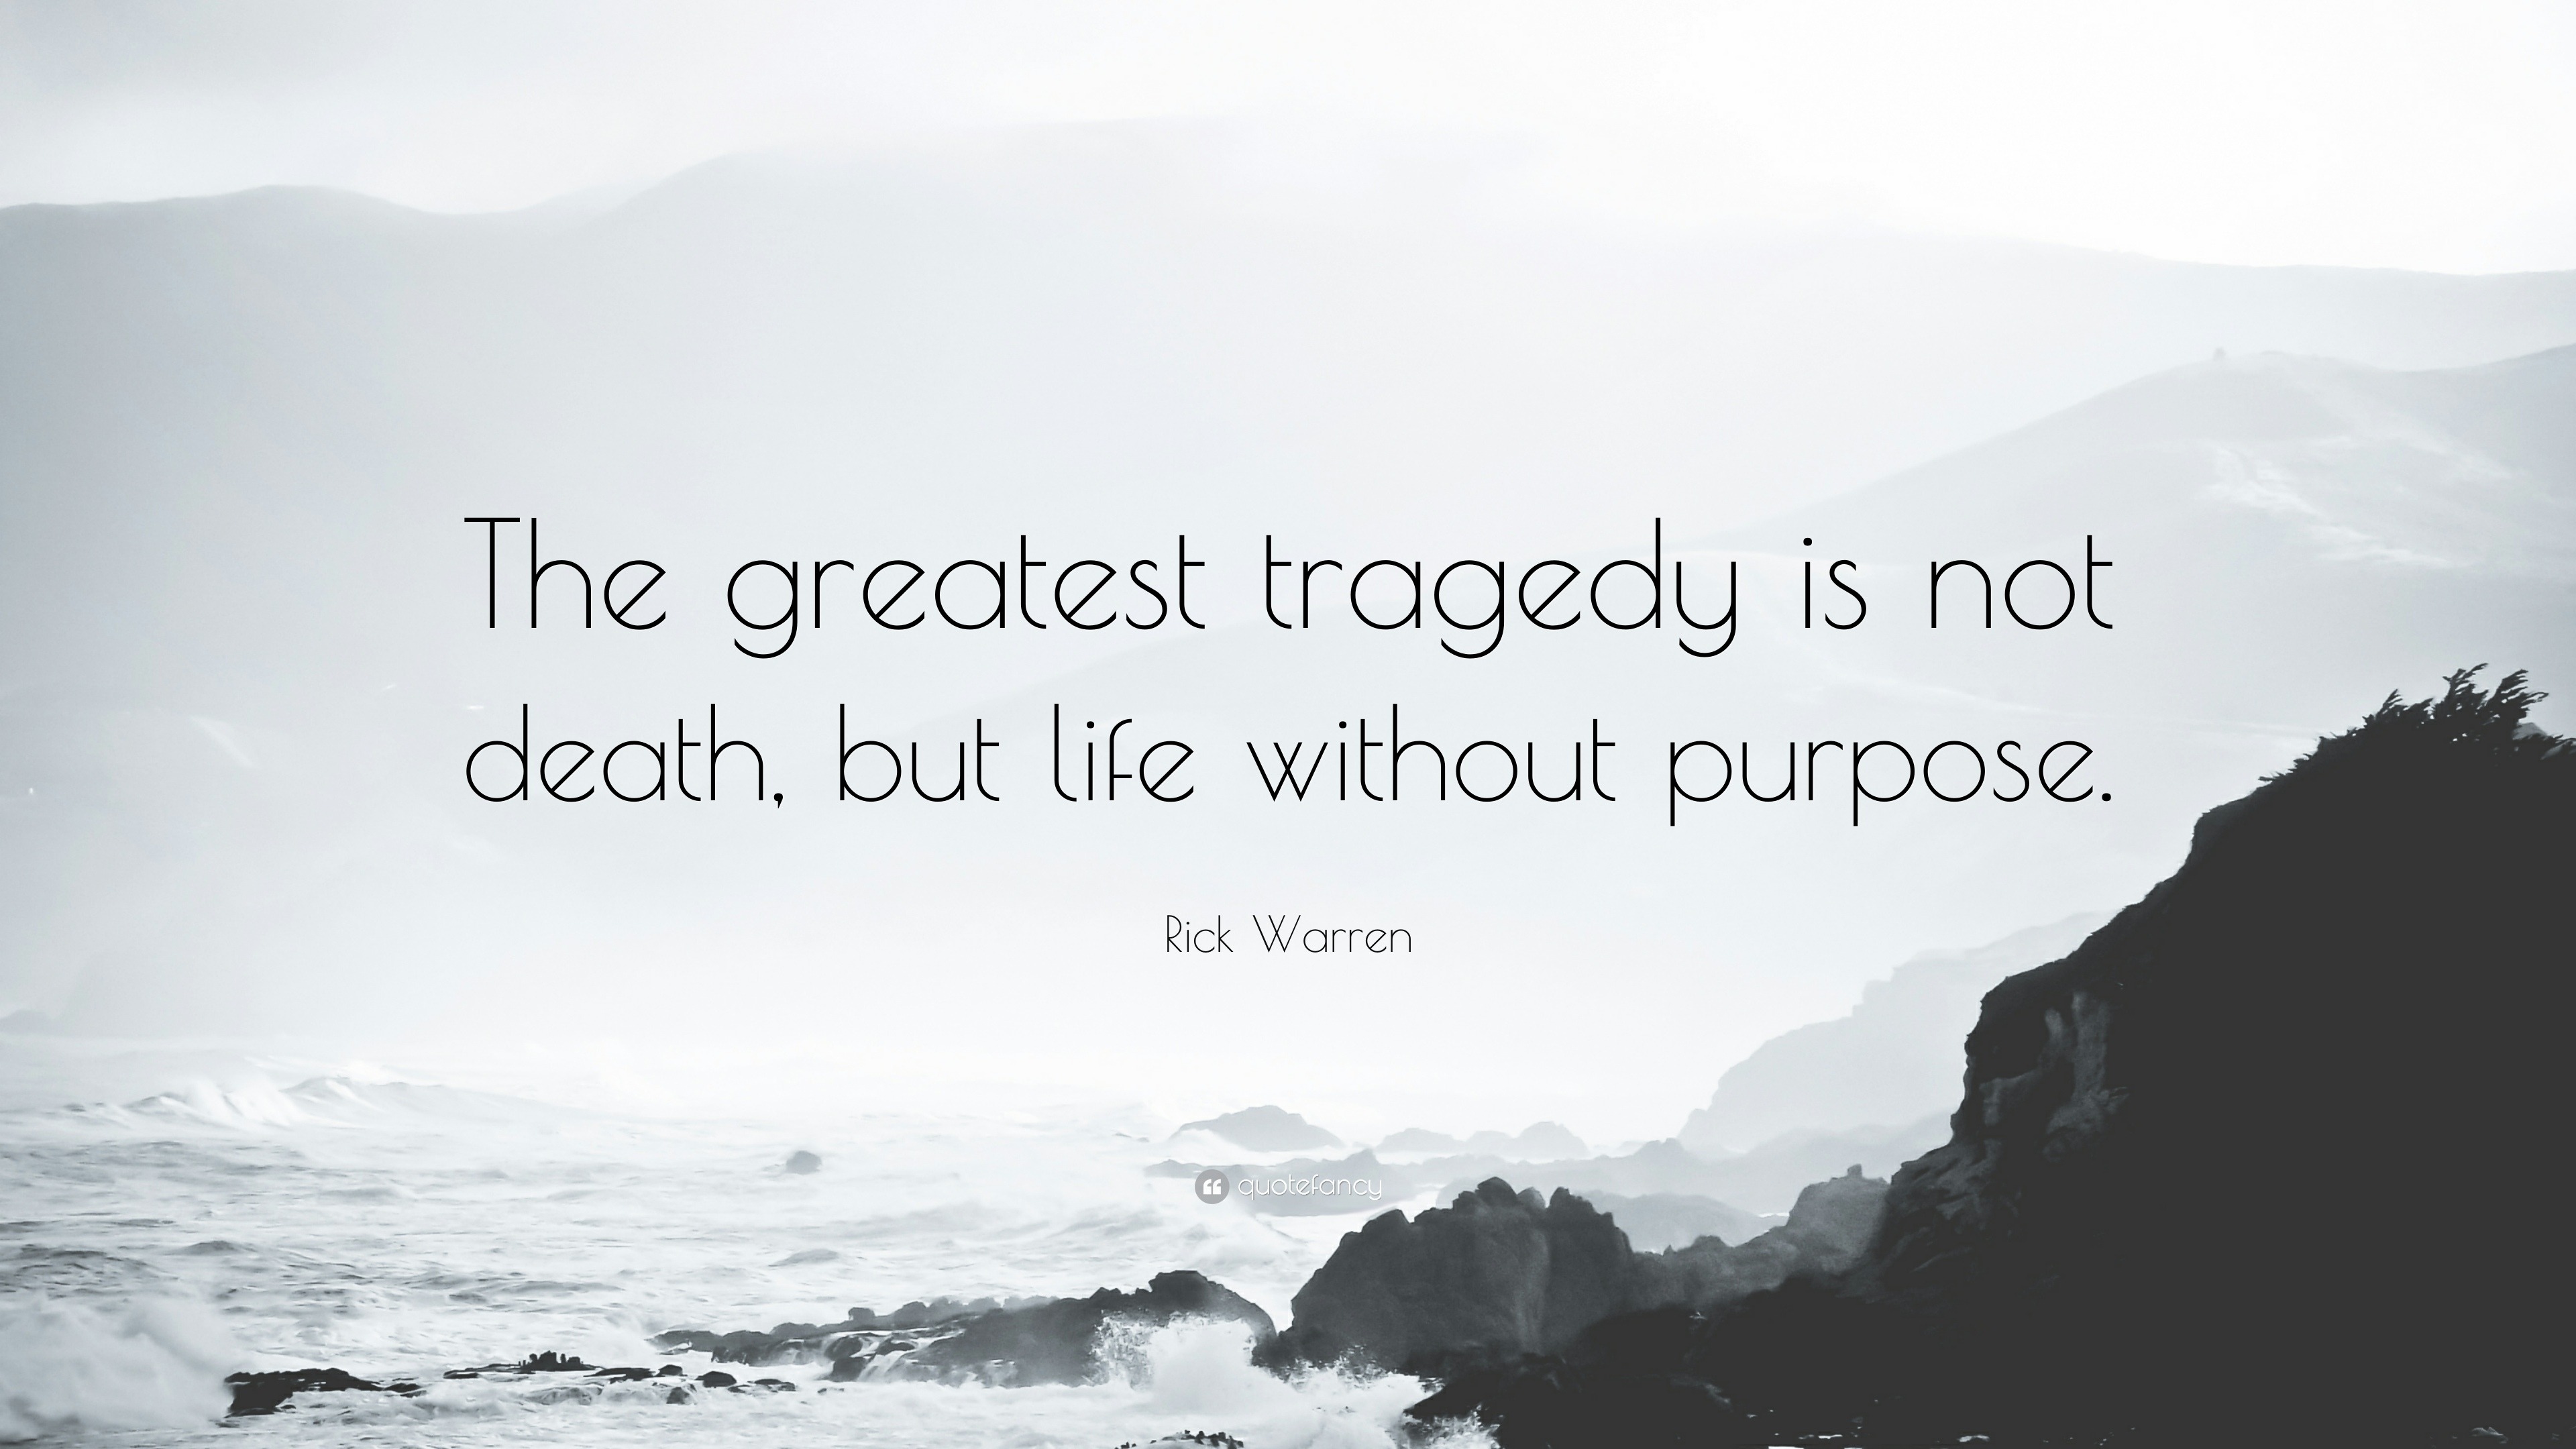 232431 Rick Warren Quote The greatest tragedy is not death but life